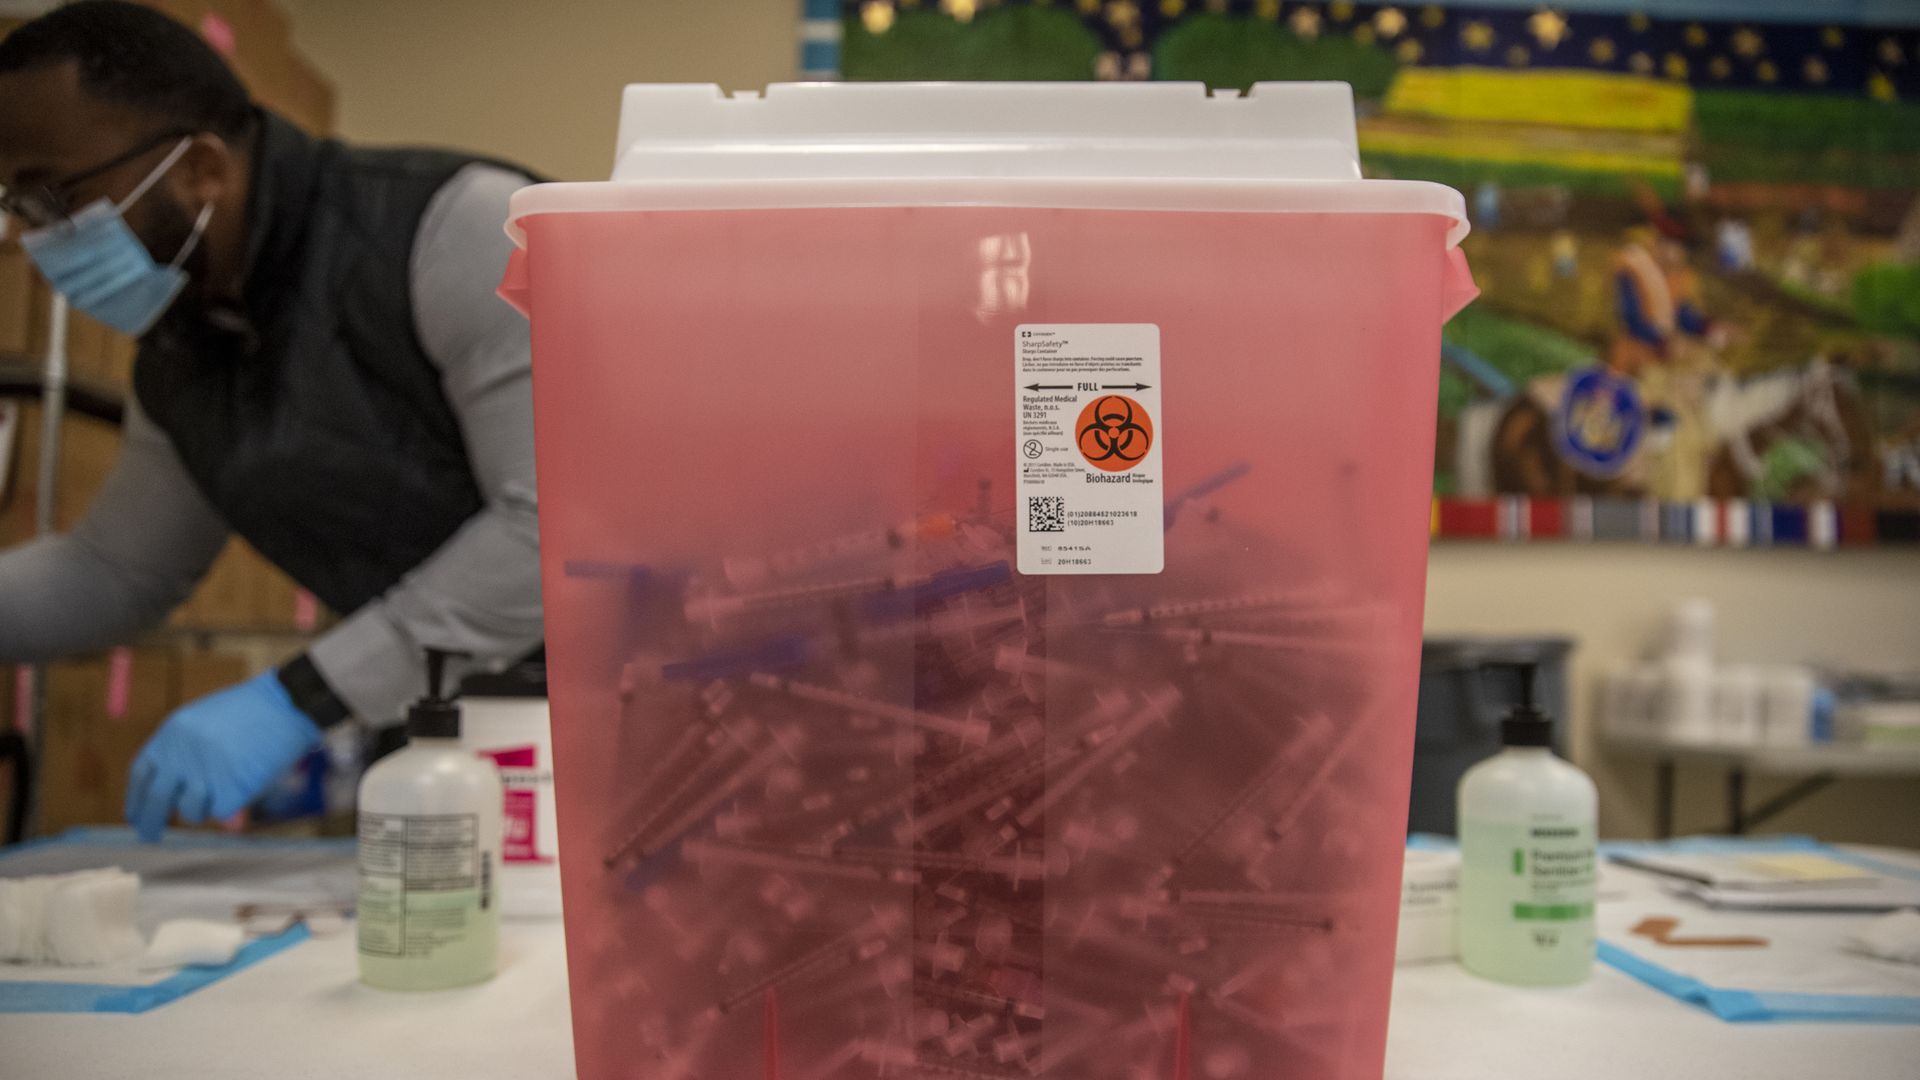 A medical wastebin filled with used syringes at a coronavirus vaccination site in San Antonio in March 2021.